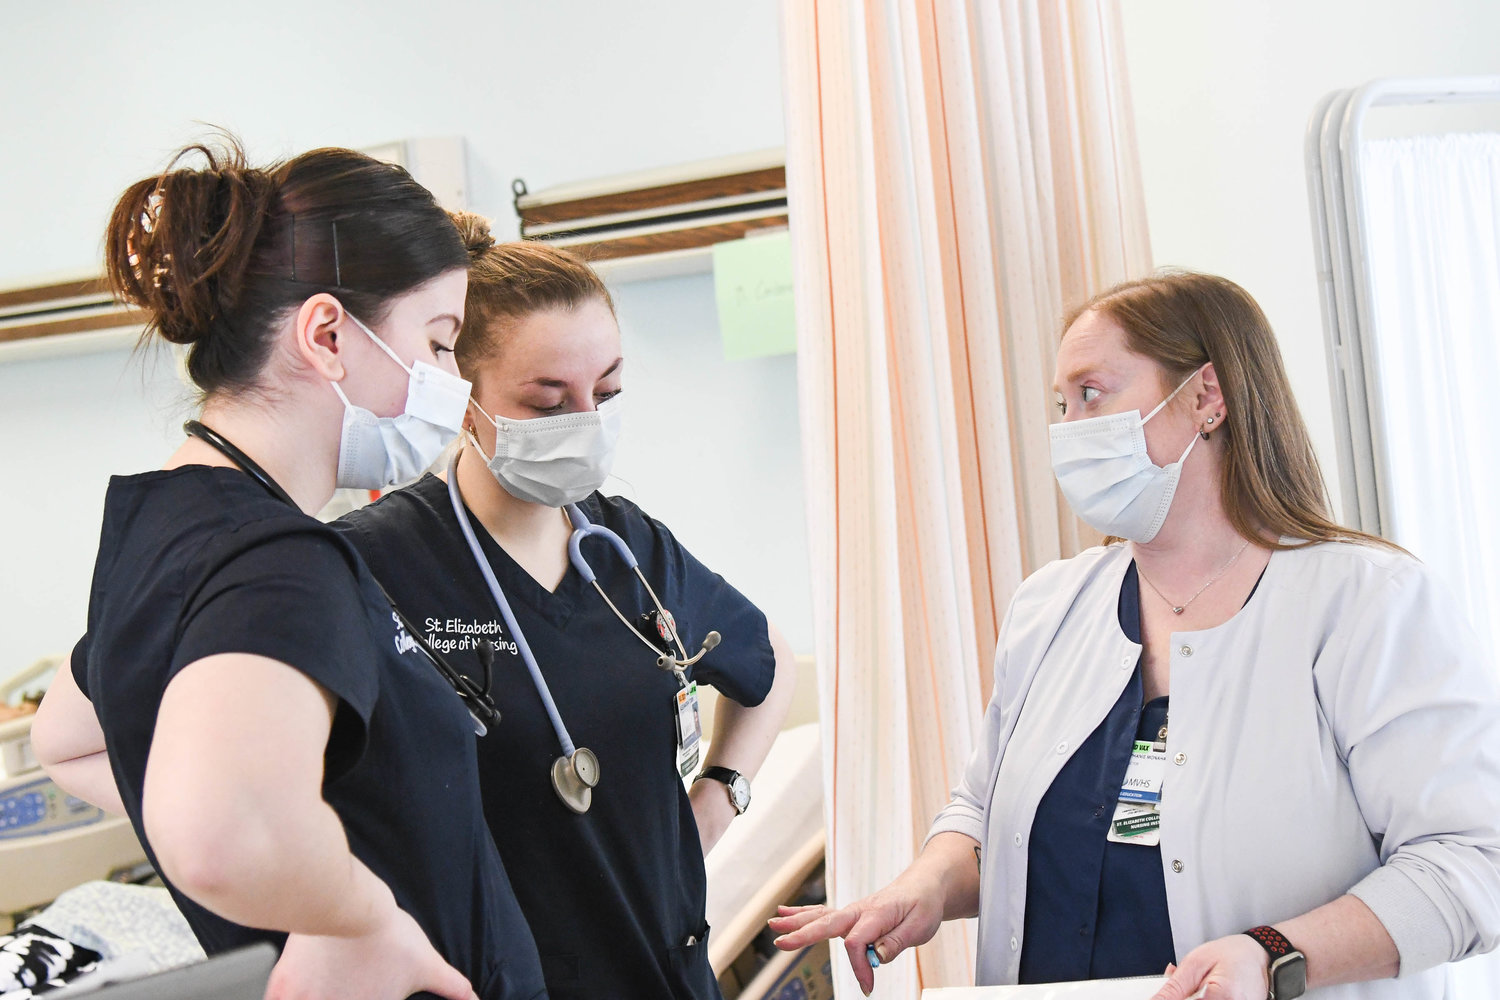 From left, Adelisa Muskic and Alexandria Tobin talk with instructor Stephanie Monahan at St. Elizabeth College of Nursing during class on Friday, April 22.